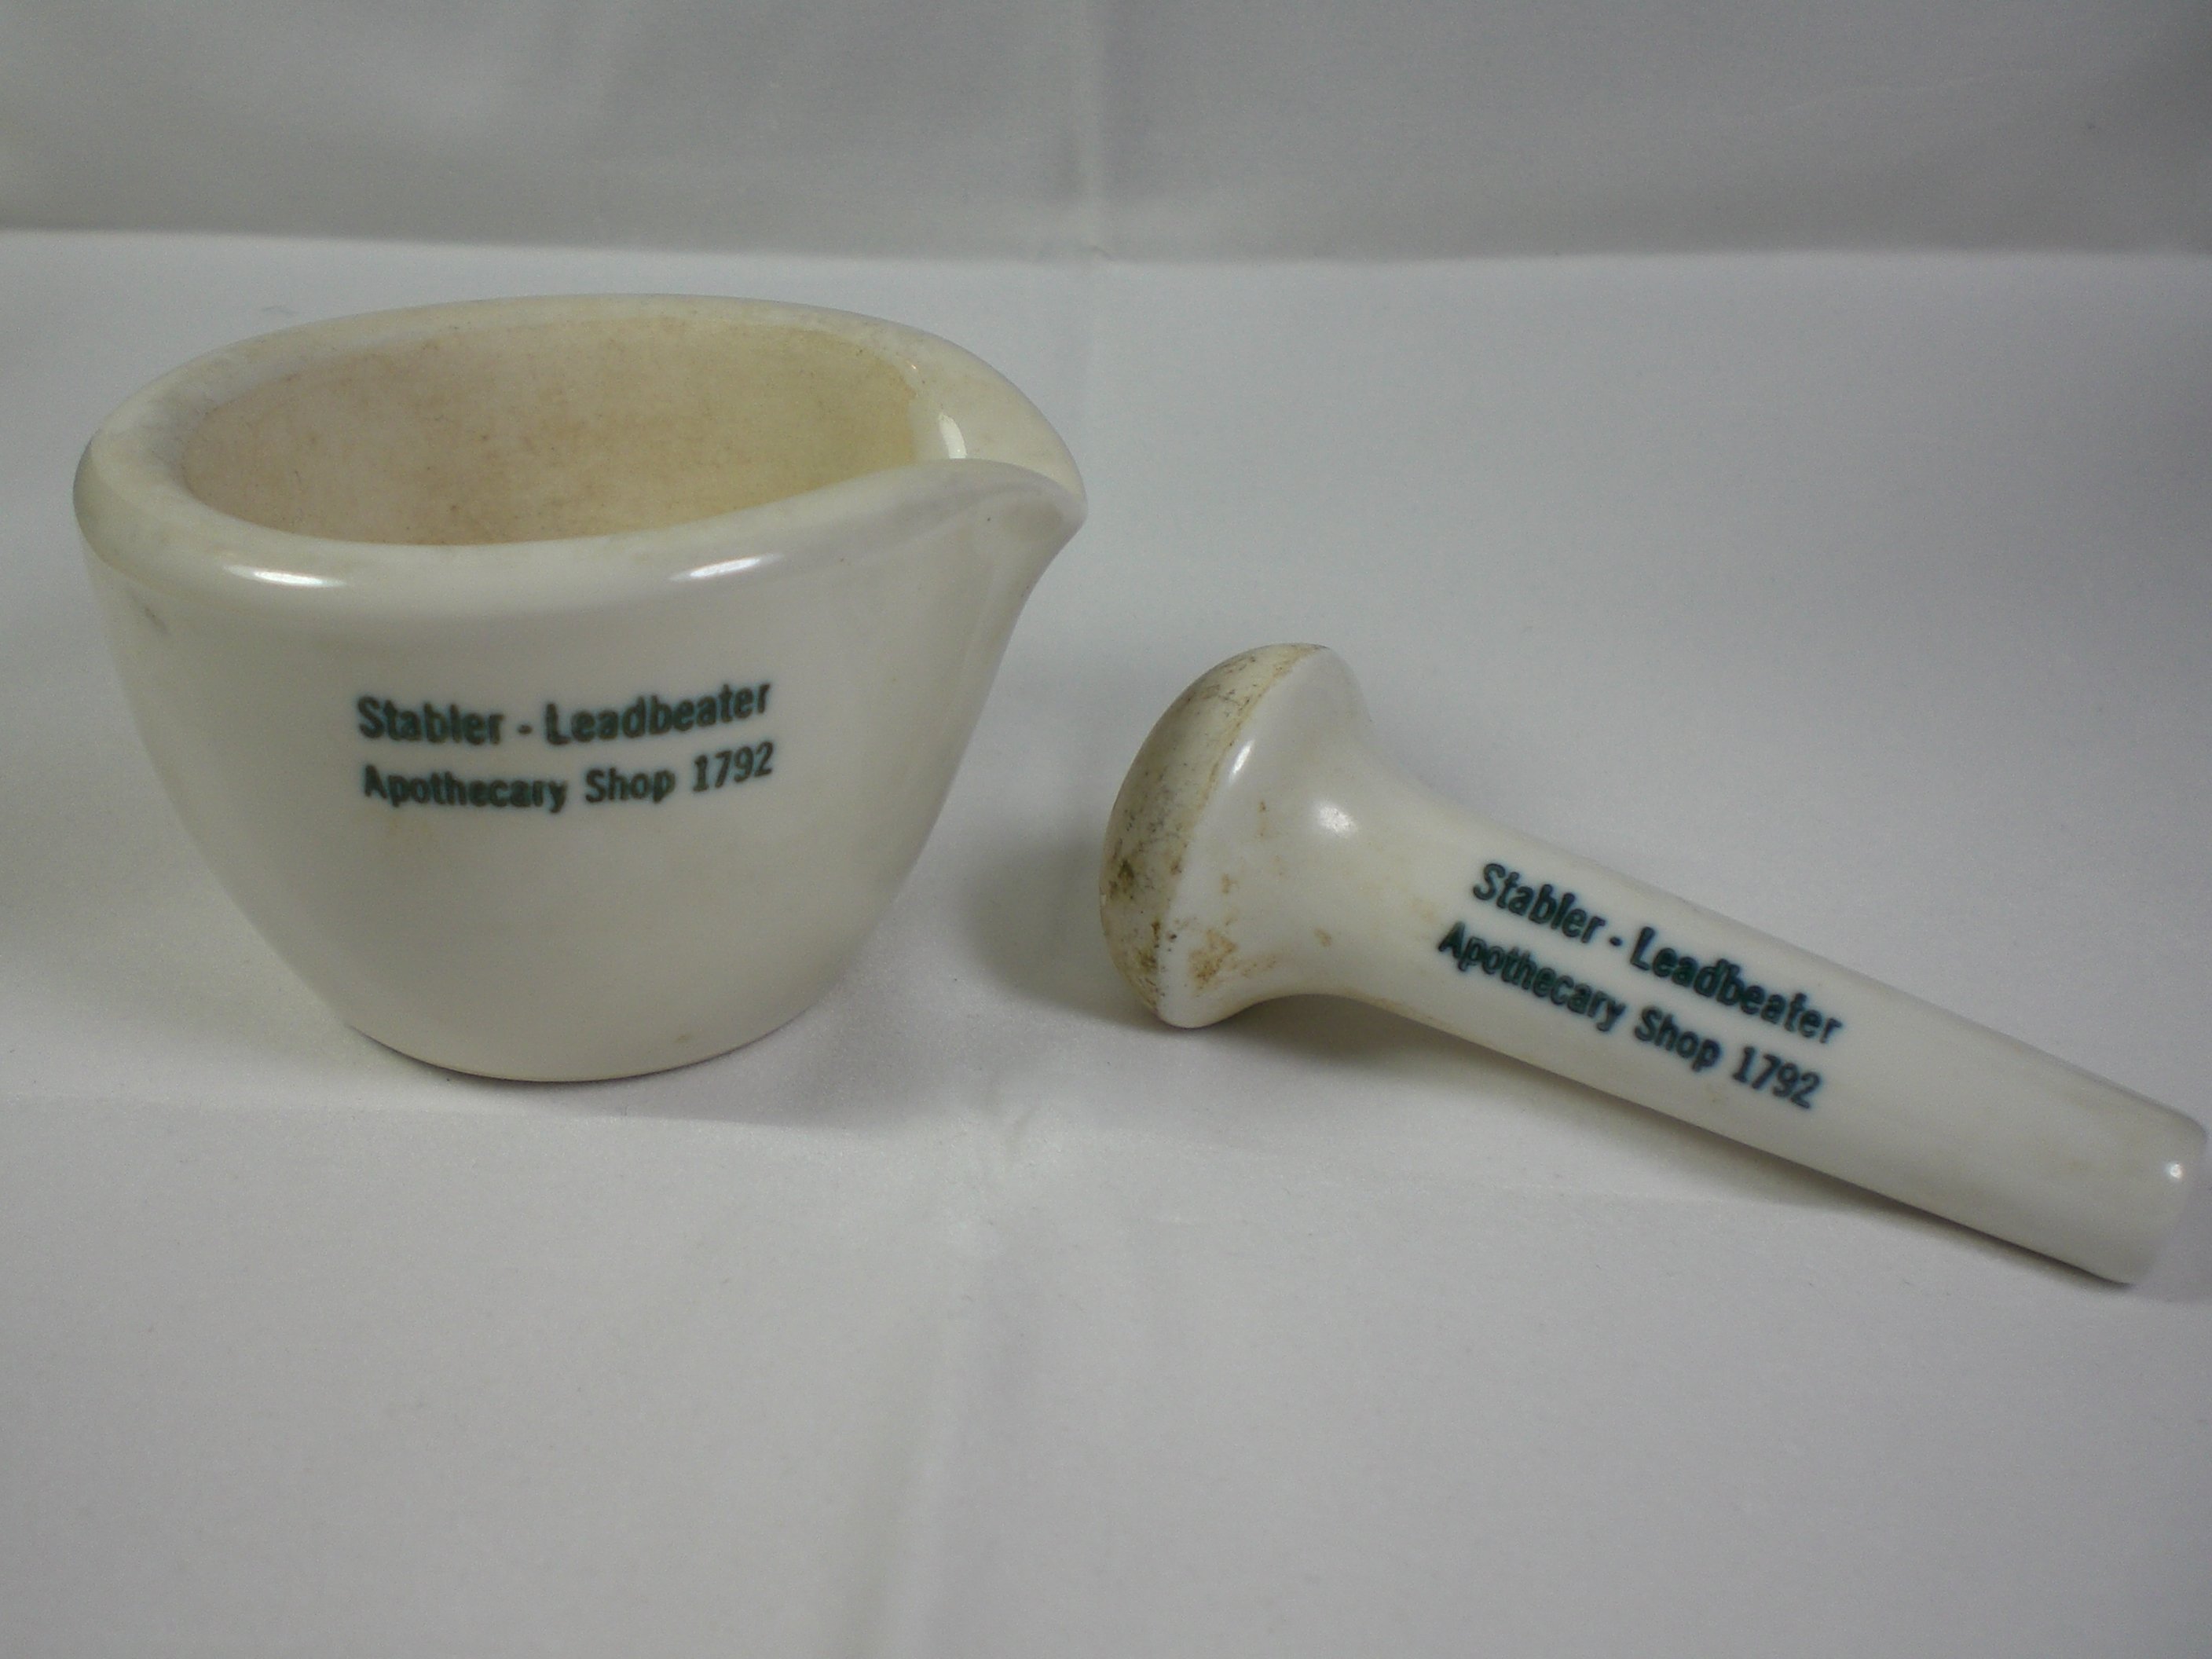 Souvenir from Stabler Leadbeater apothecary mortar and pestle